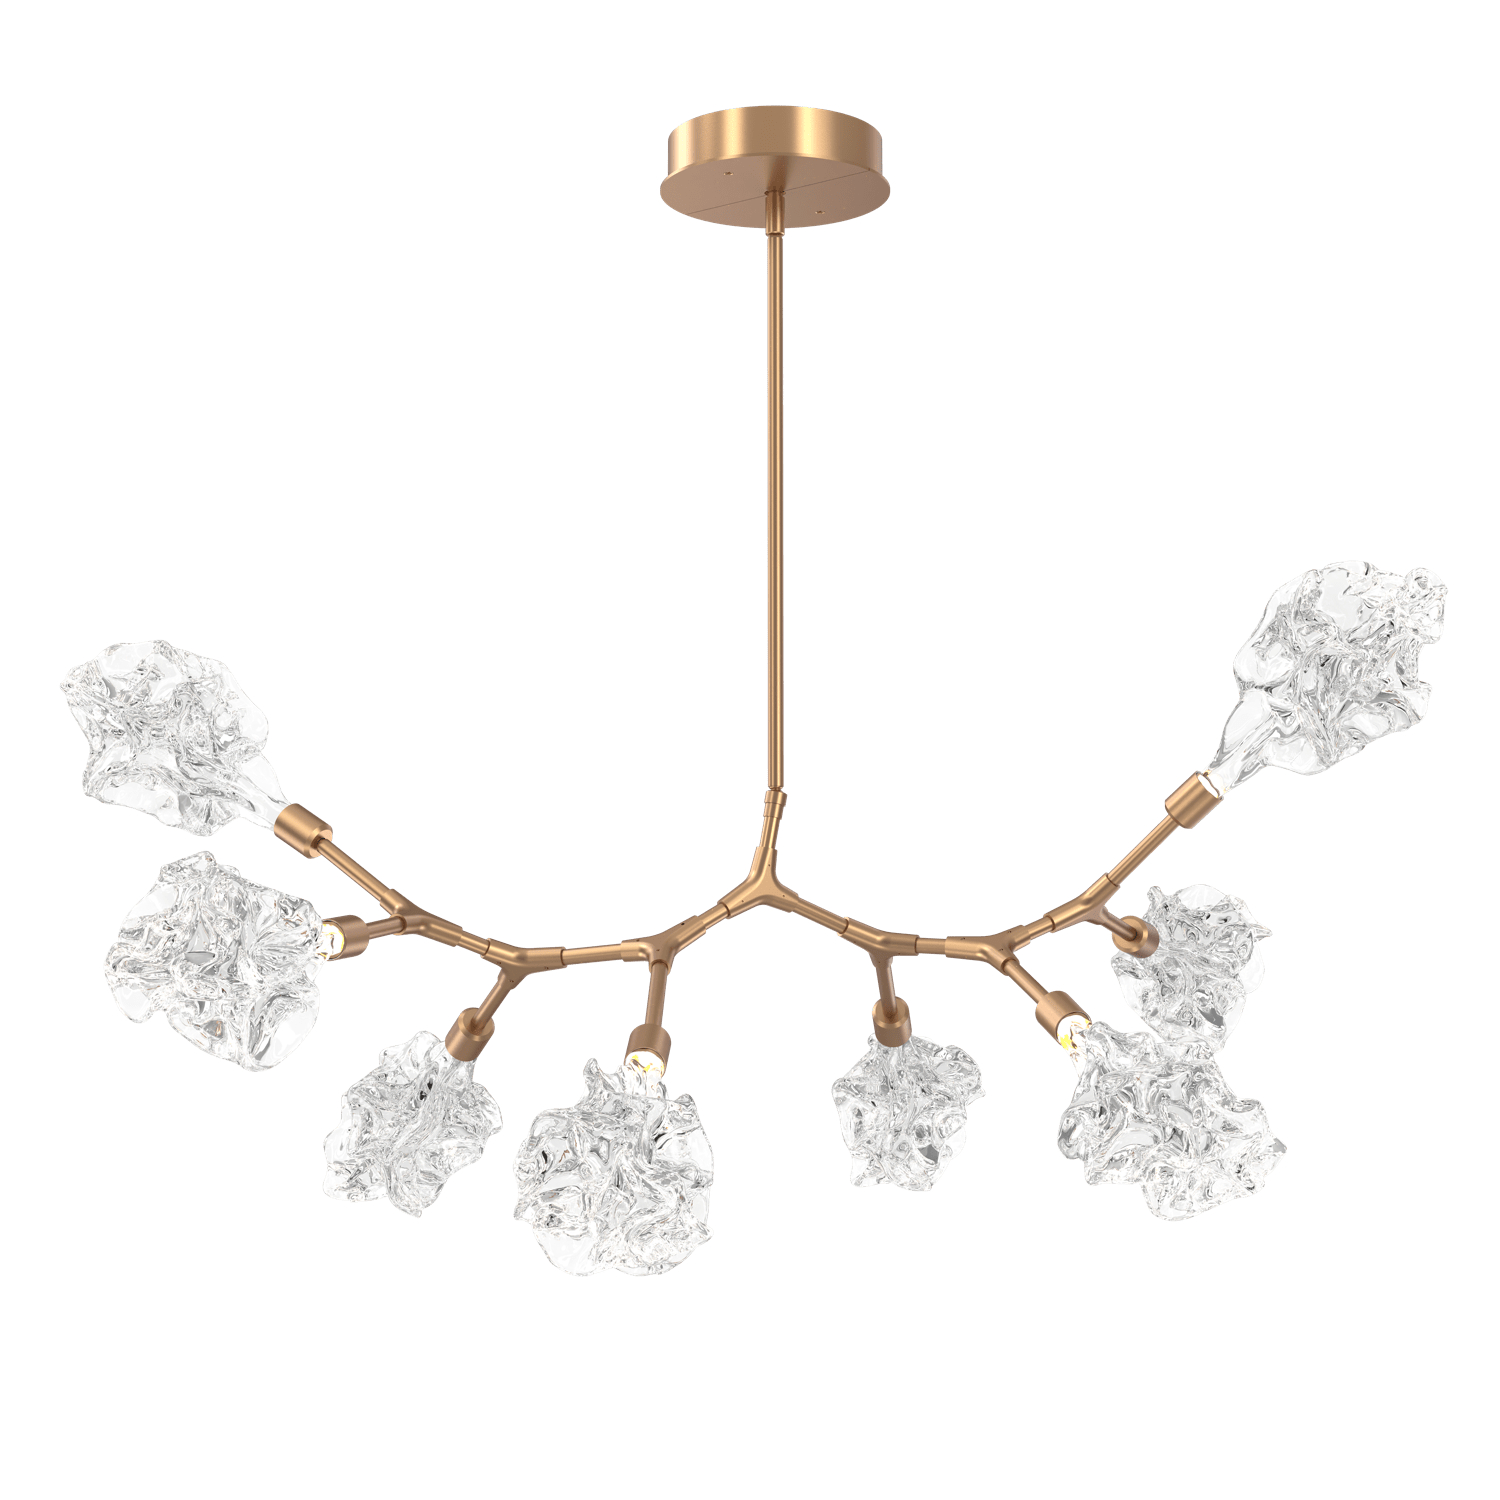 PLB0059-BB-NB-Hammerton-Studio-Blossom-8-light-organic-branch-chandelier-with-novel-brass-finish-and-clear-handblown-crystal-glass-shades-and-LED-lamping